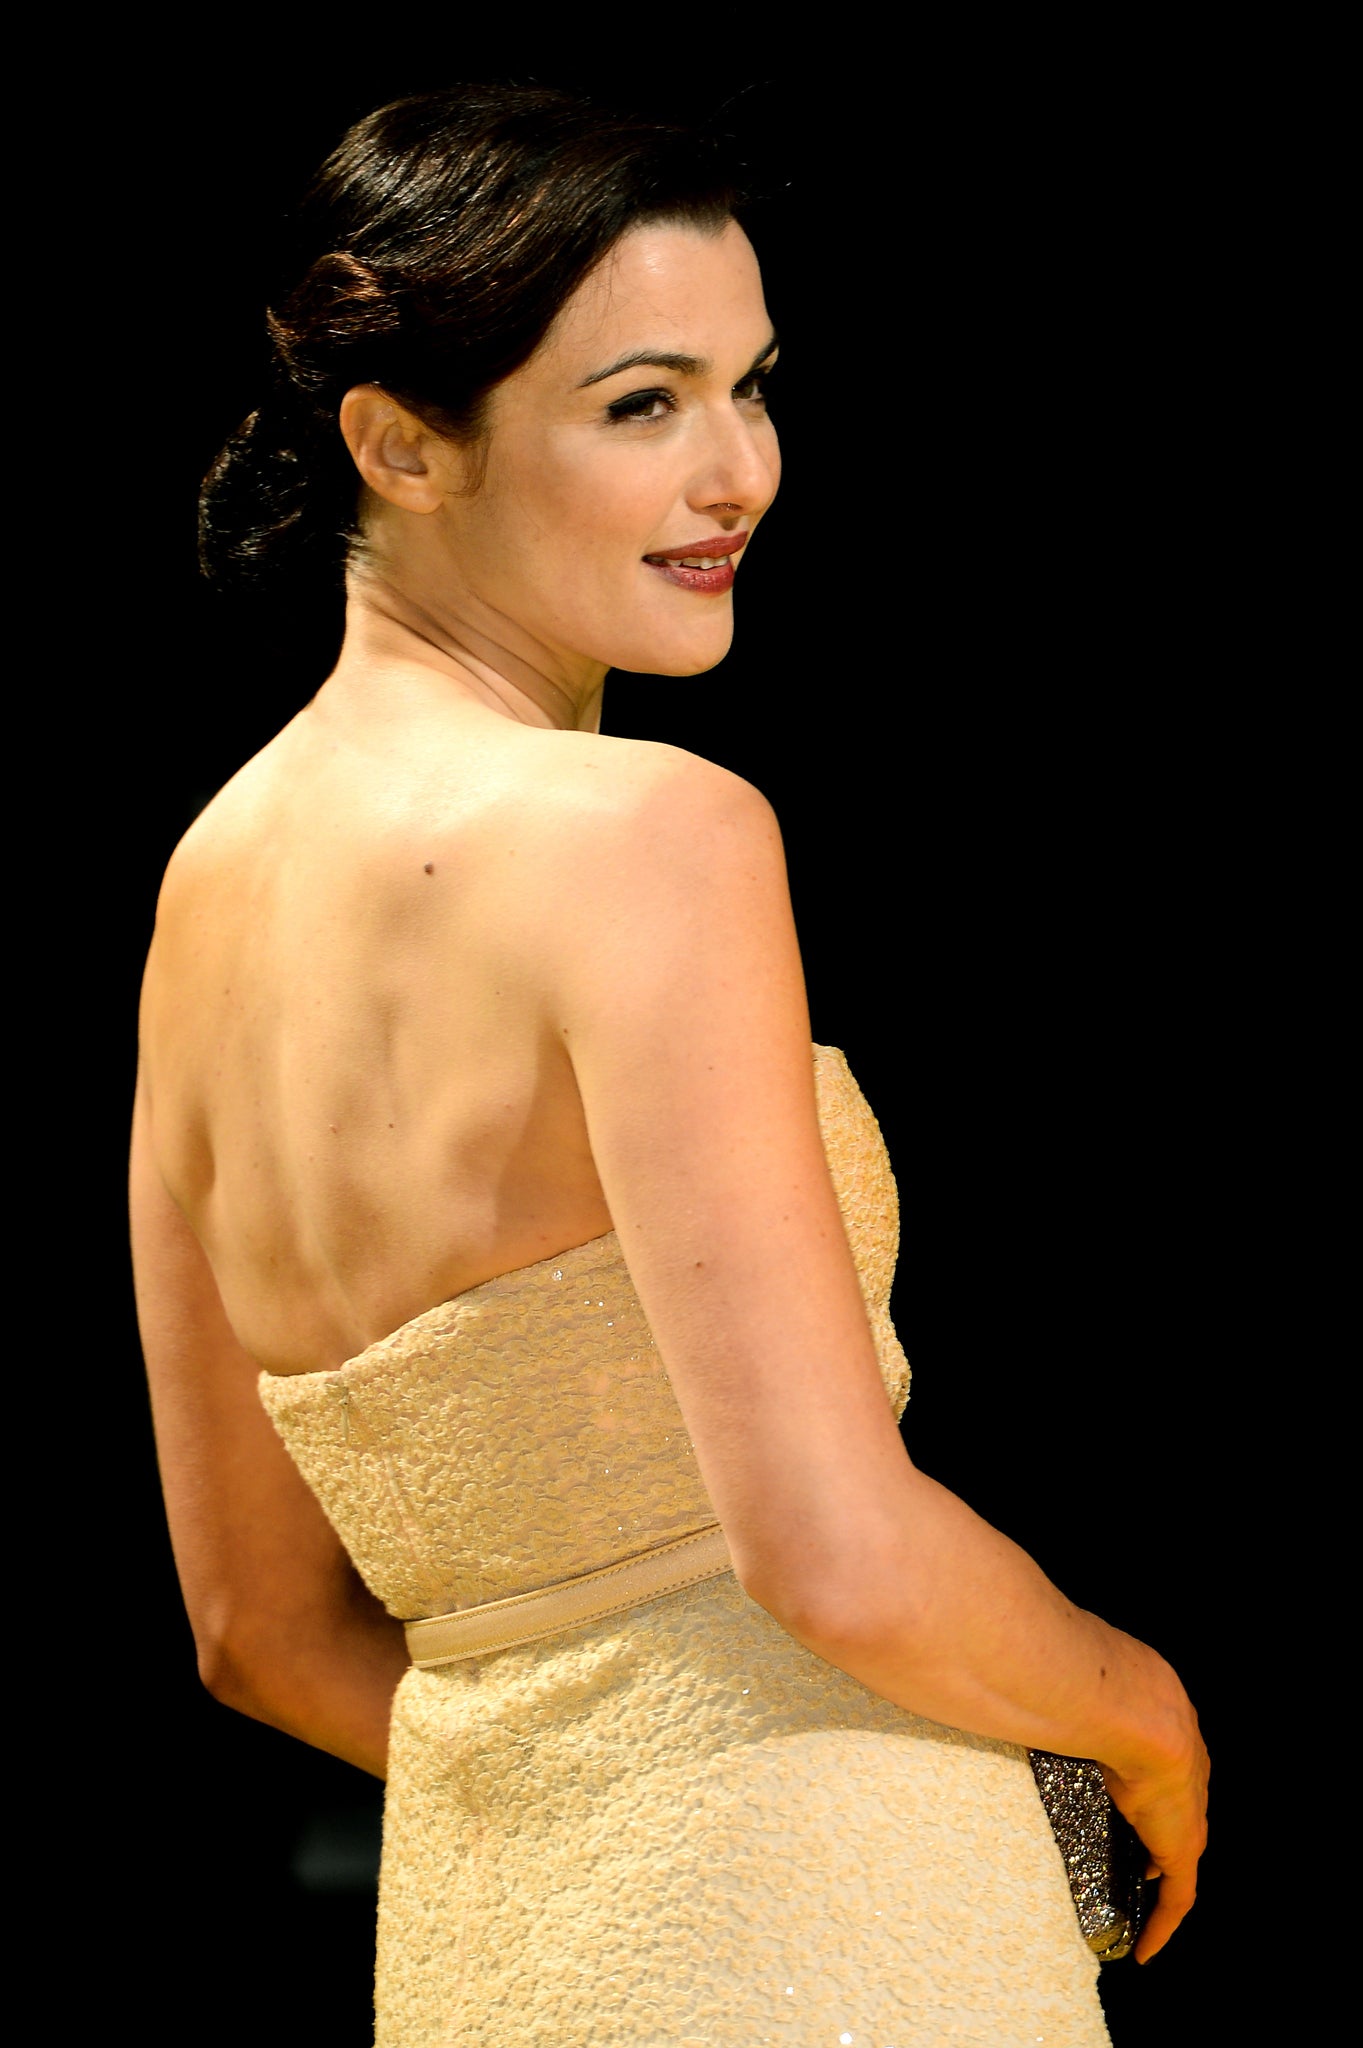 Rachel Weisz at the Oz The Great And Powerful premiere